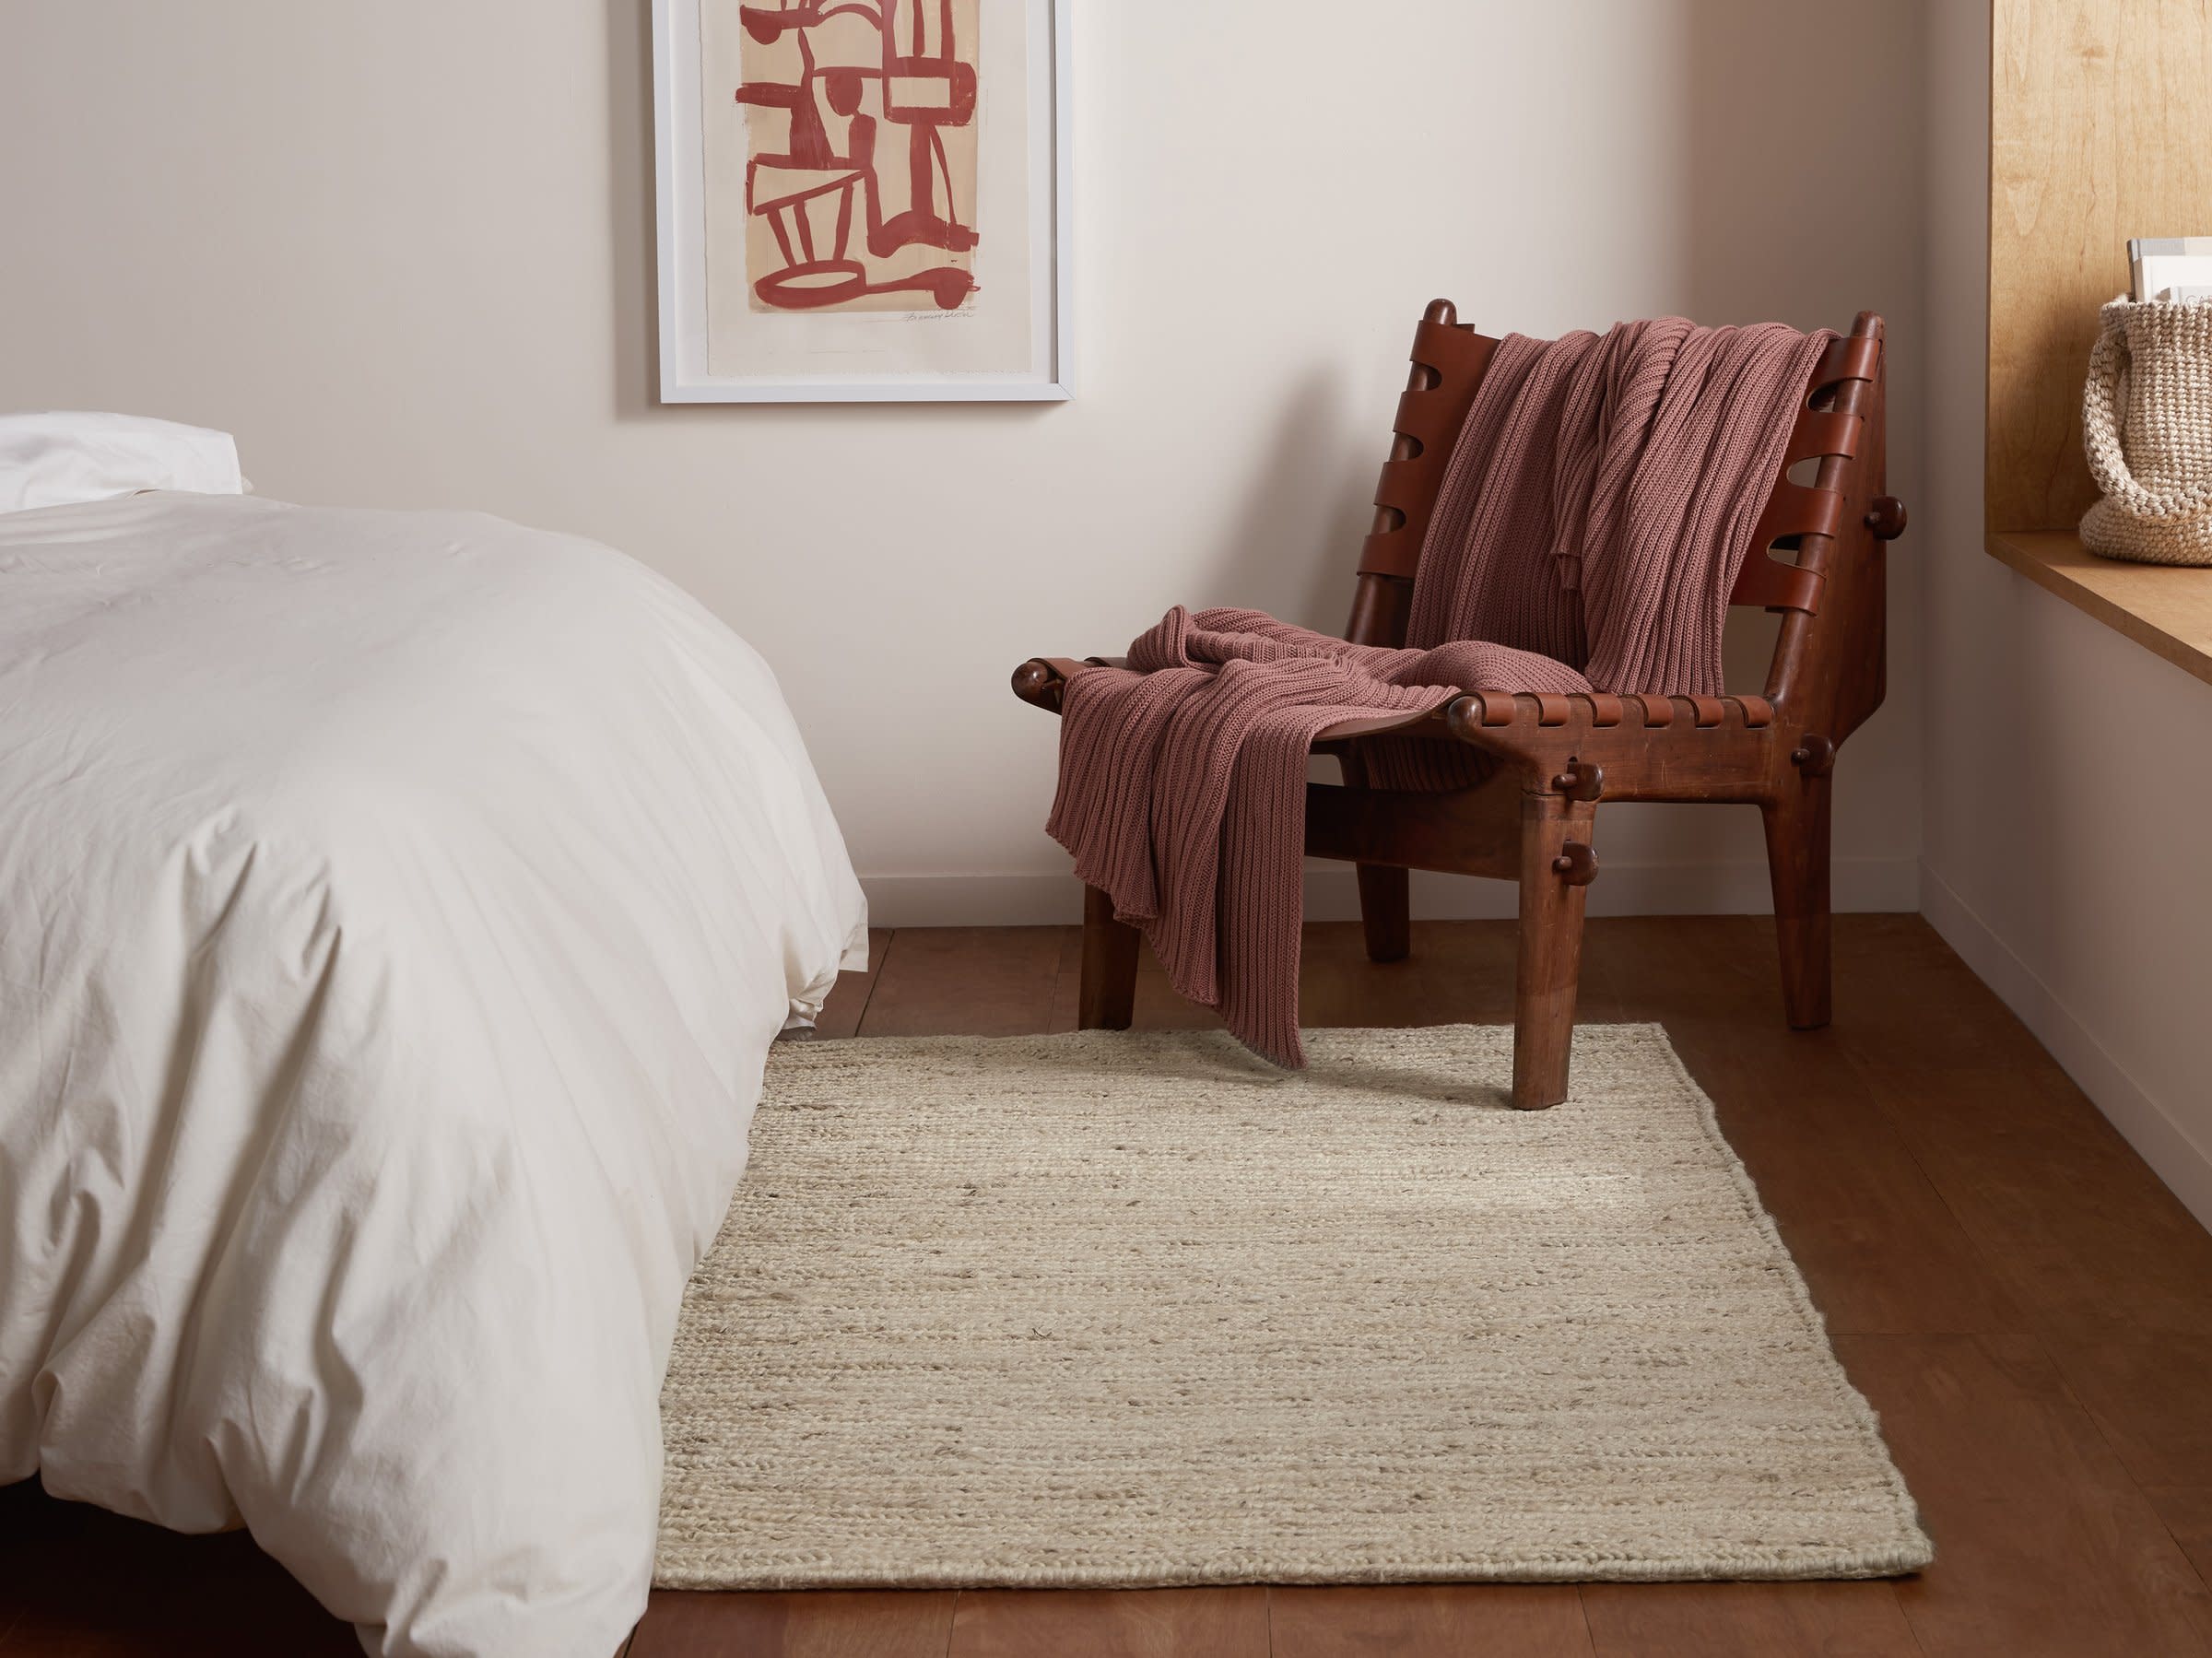 Chunky Jute Rug Shown In A Room